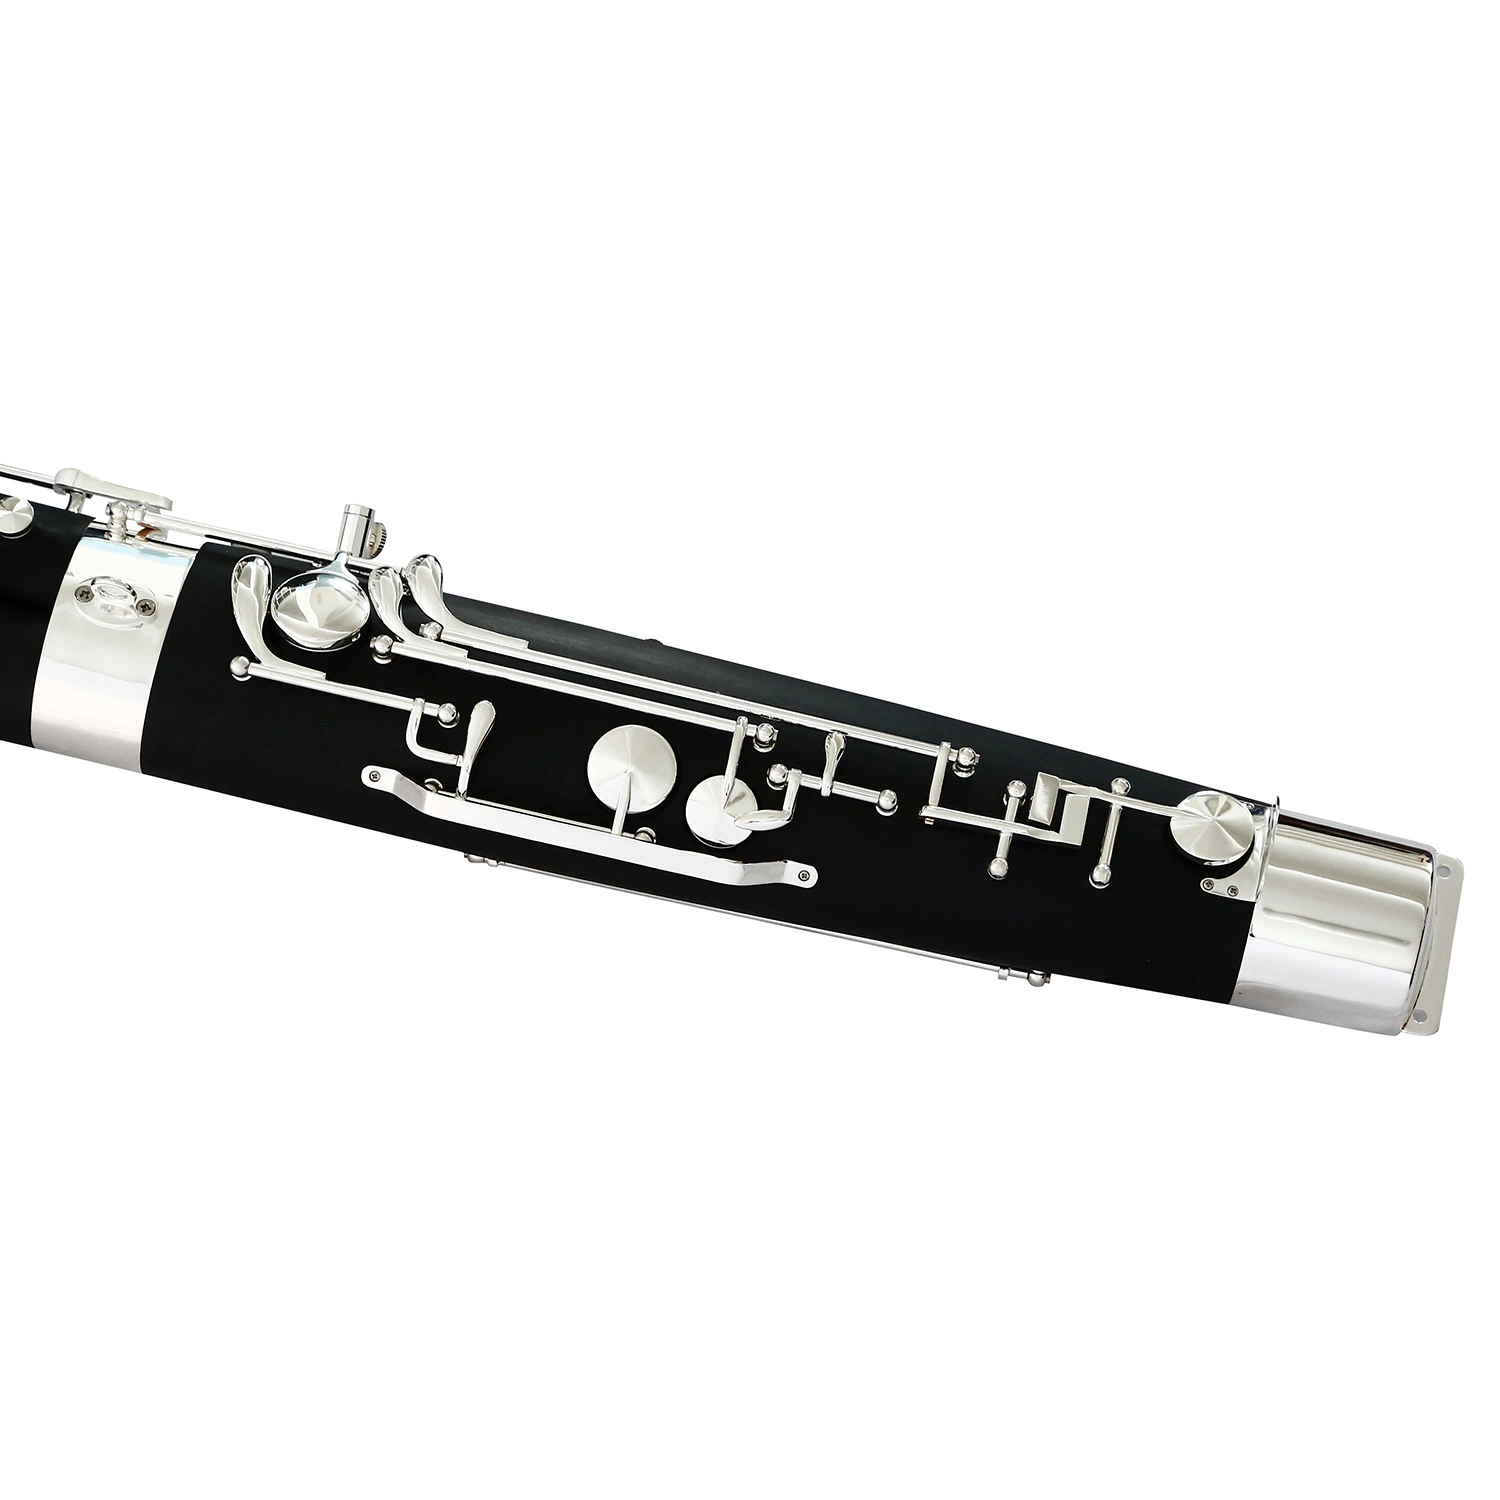 Wholesale/Supplier Bassoon Woodwind Musical Instrument. Made in China